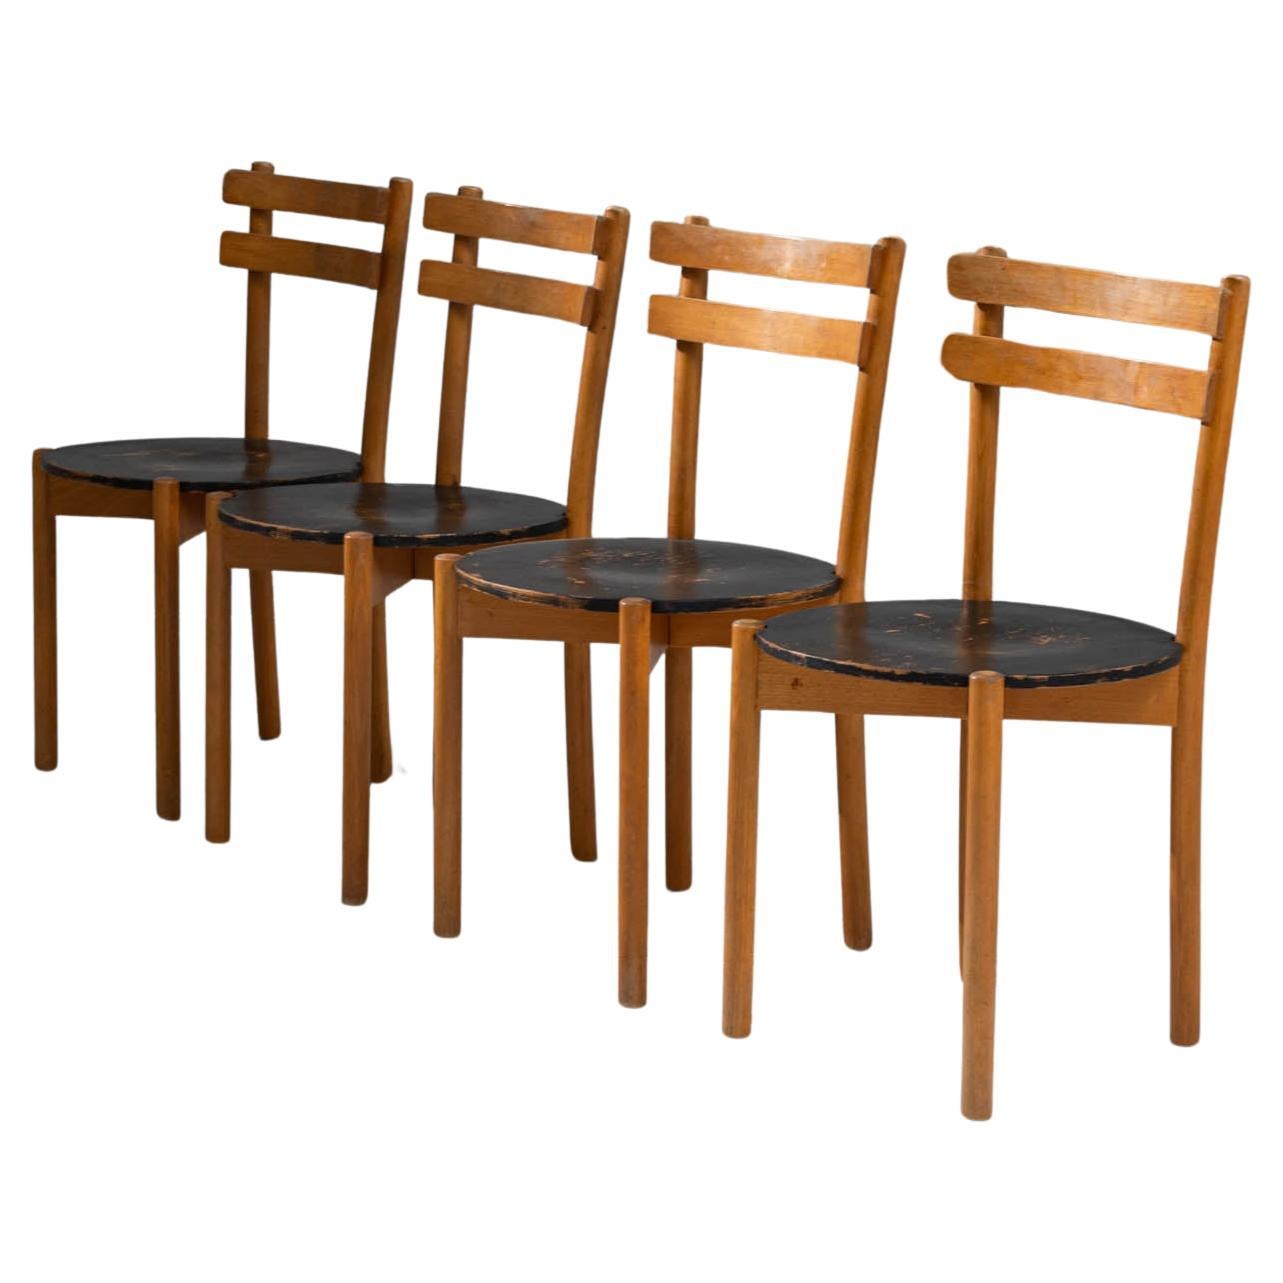 20th Century German EKA Wohnmöbel Wooden Dining Chairs, Set of 4 For Sale